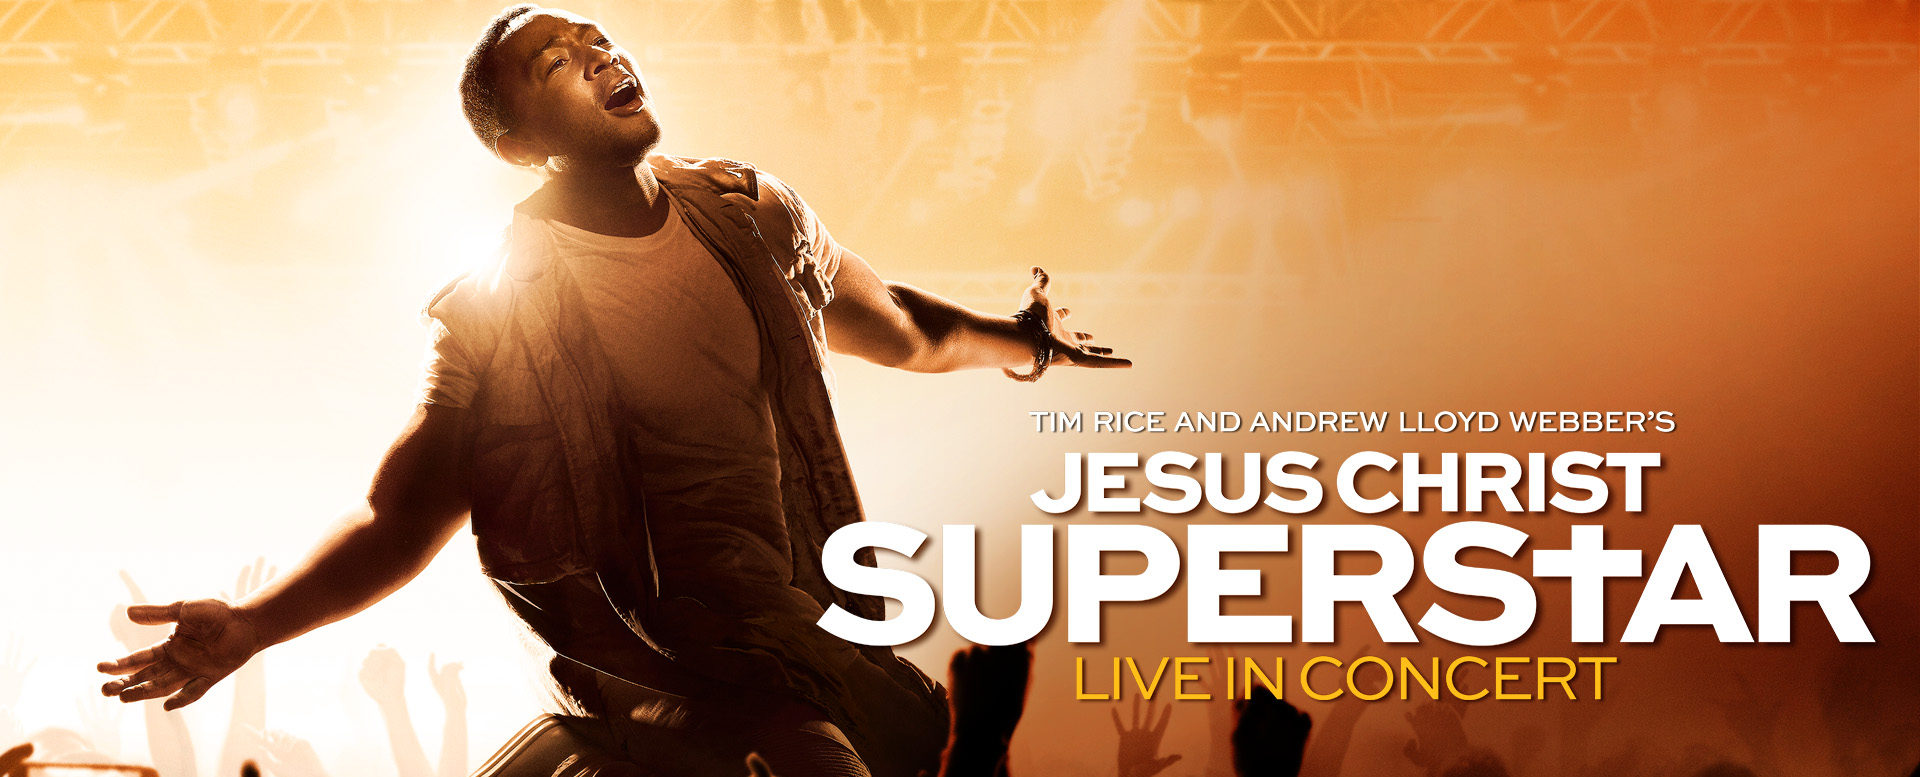 Jesus Christ Superstar is the Camp Musical We've Been Waiting For